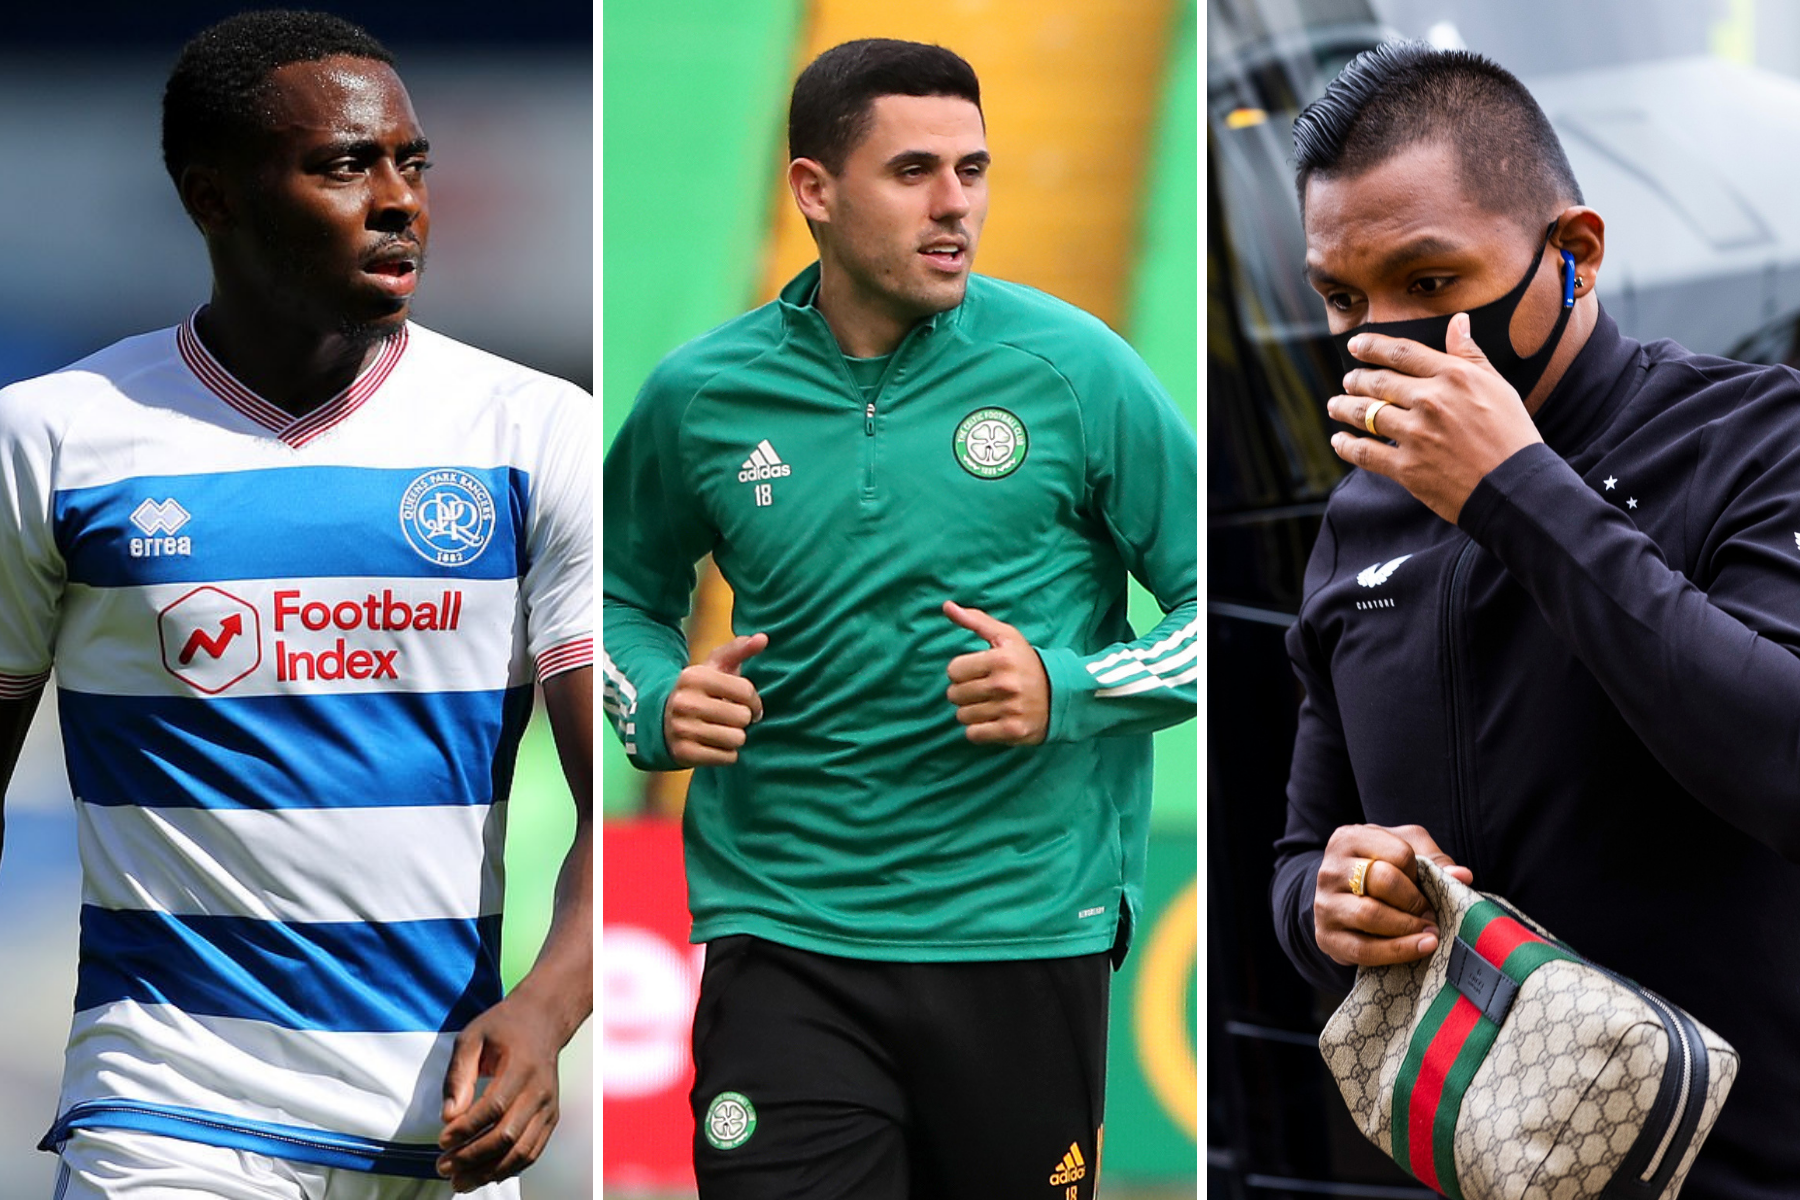 Scottish transfer news as it happens: Celtic plotting move for £5m rated winger | Rogic could still quit | Morelos latest